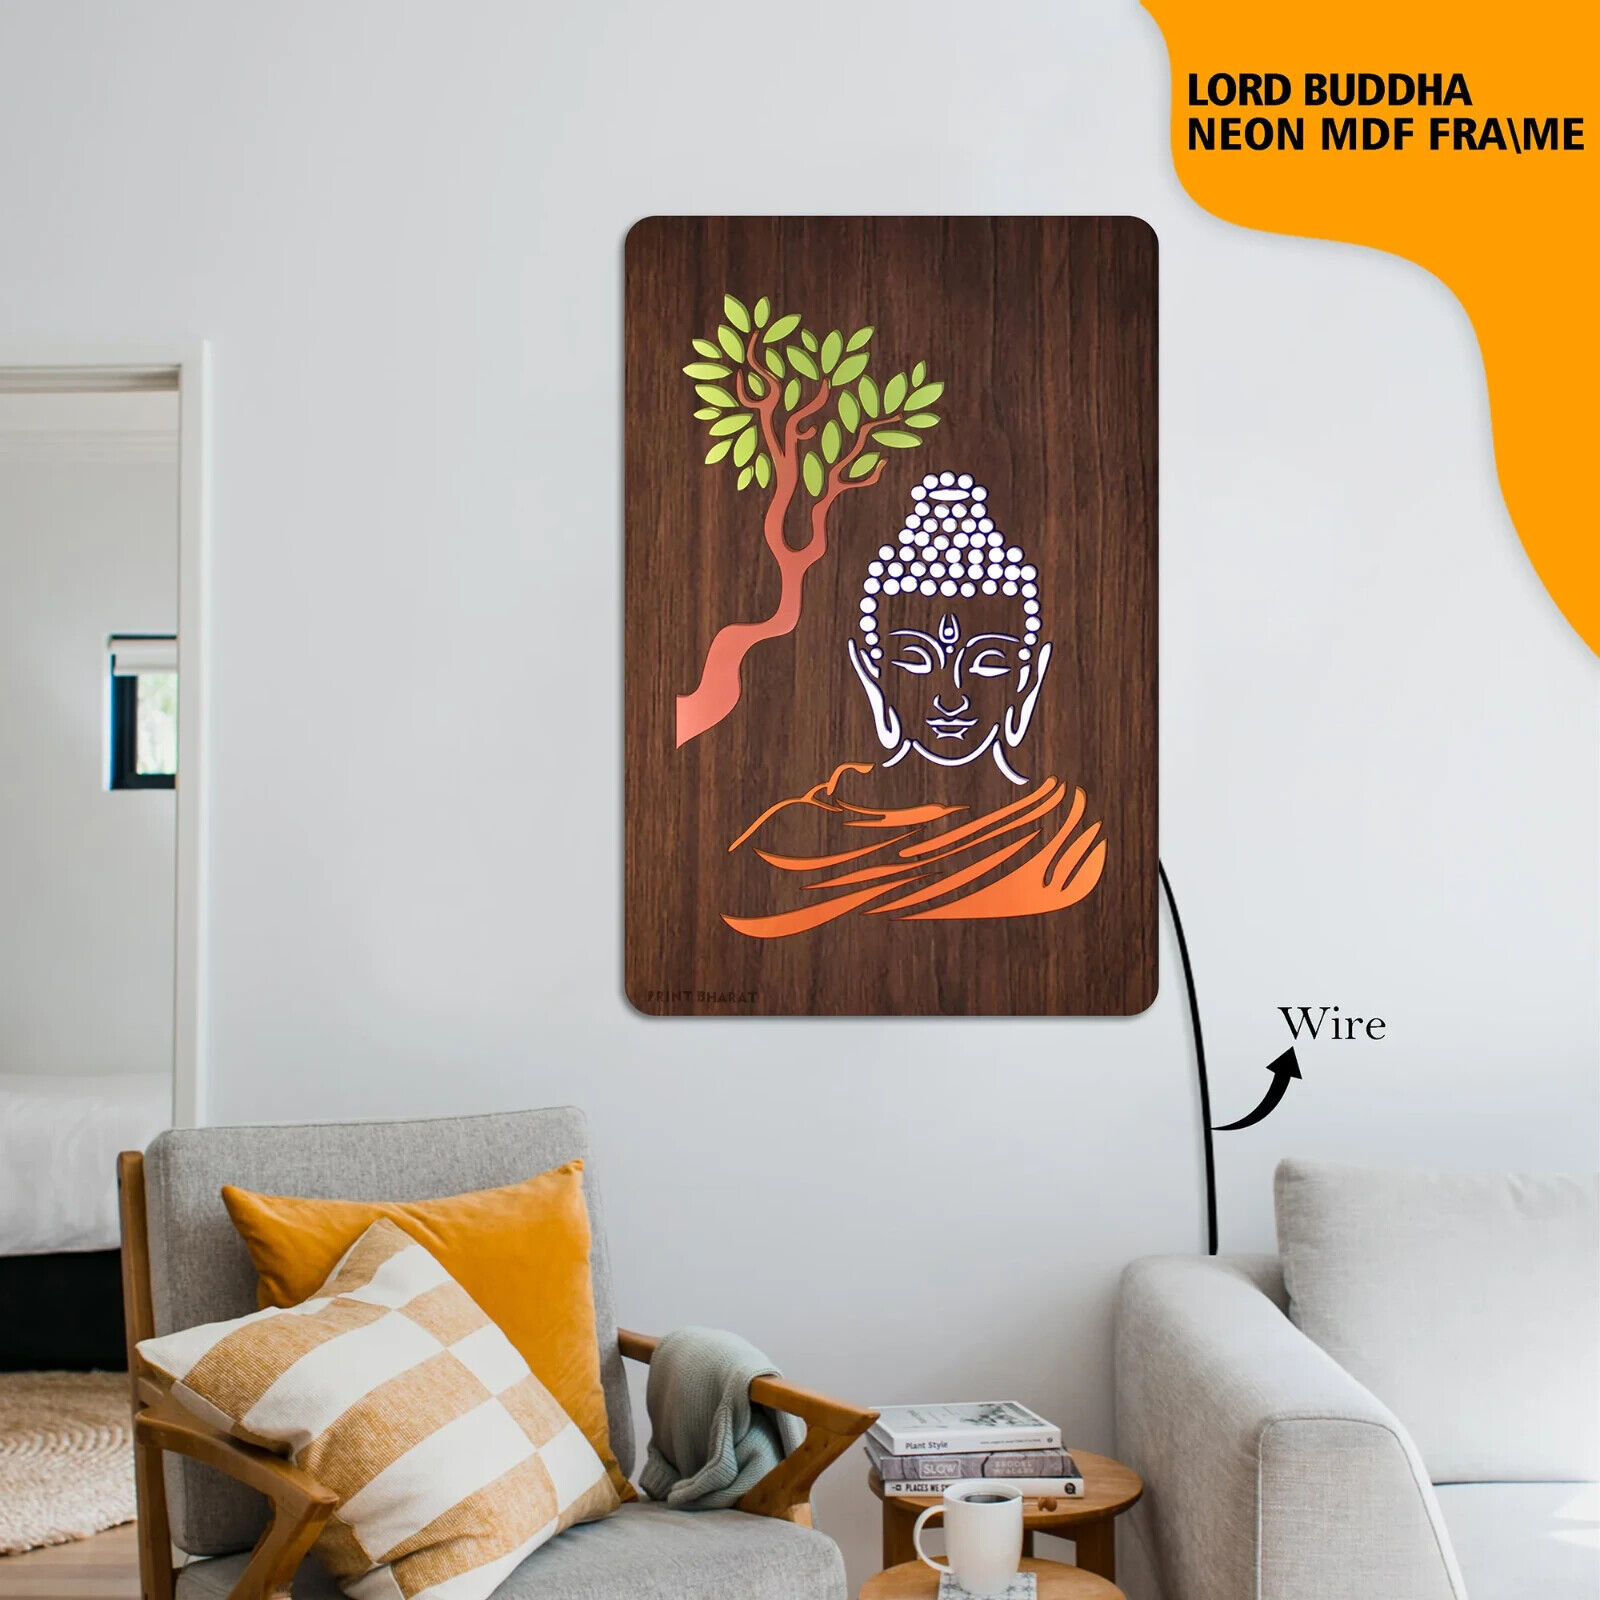 NEON LORD BUDDHA FRAME With LED Light 12x18CM For Decorate Your House Pooja Ghar